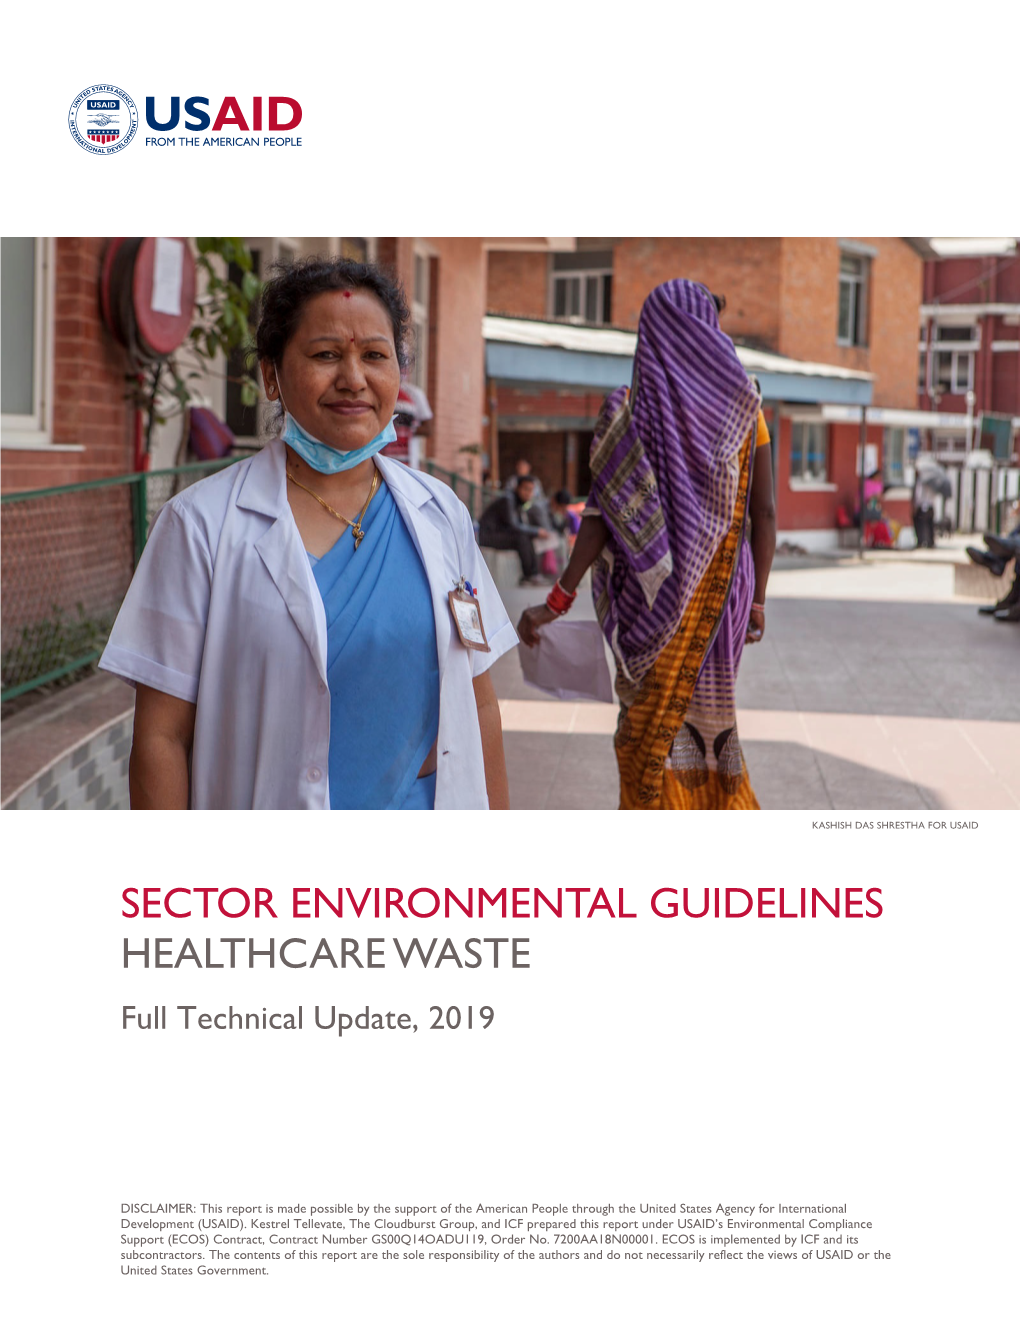 SECTOR ENVIRONMENTAL GUIDELINES HEALTHCARE WASTE Full Technical Update, 2019